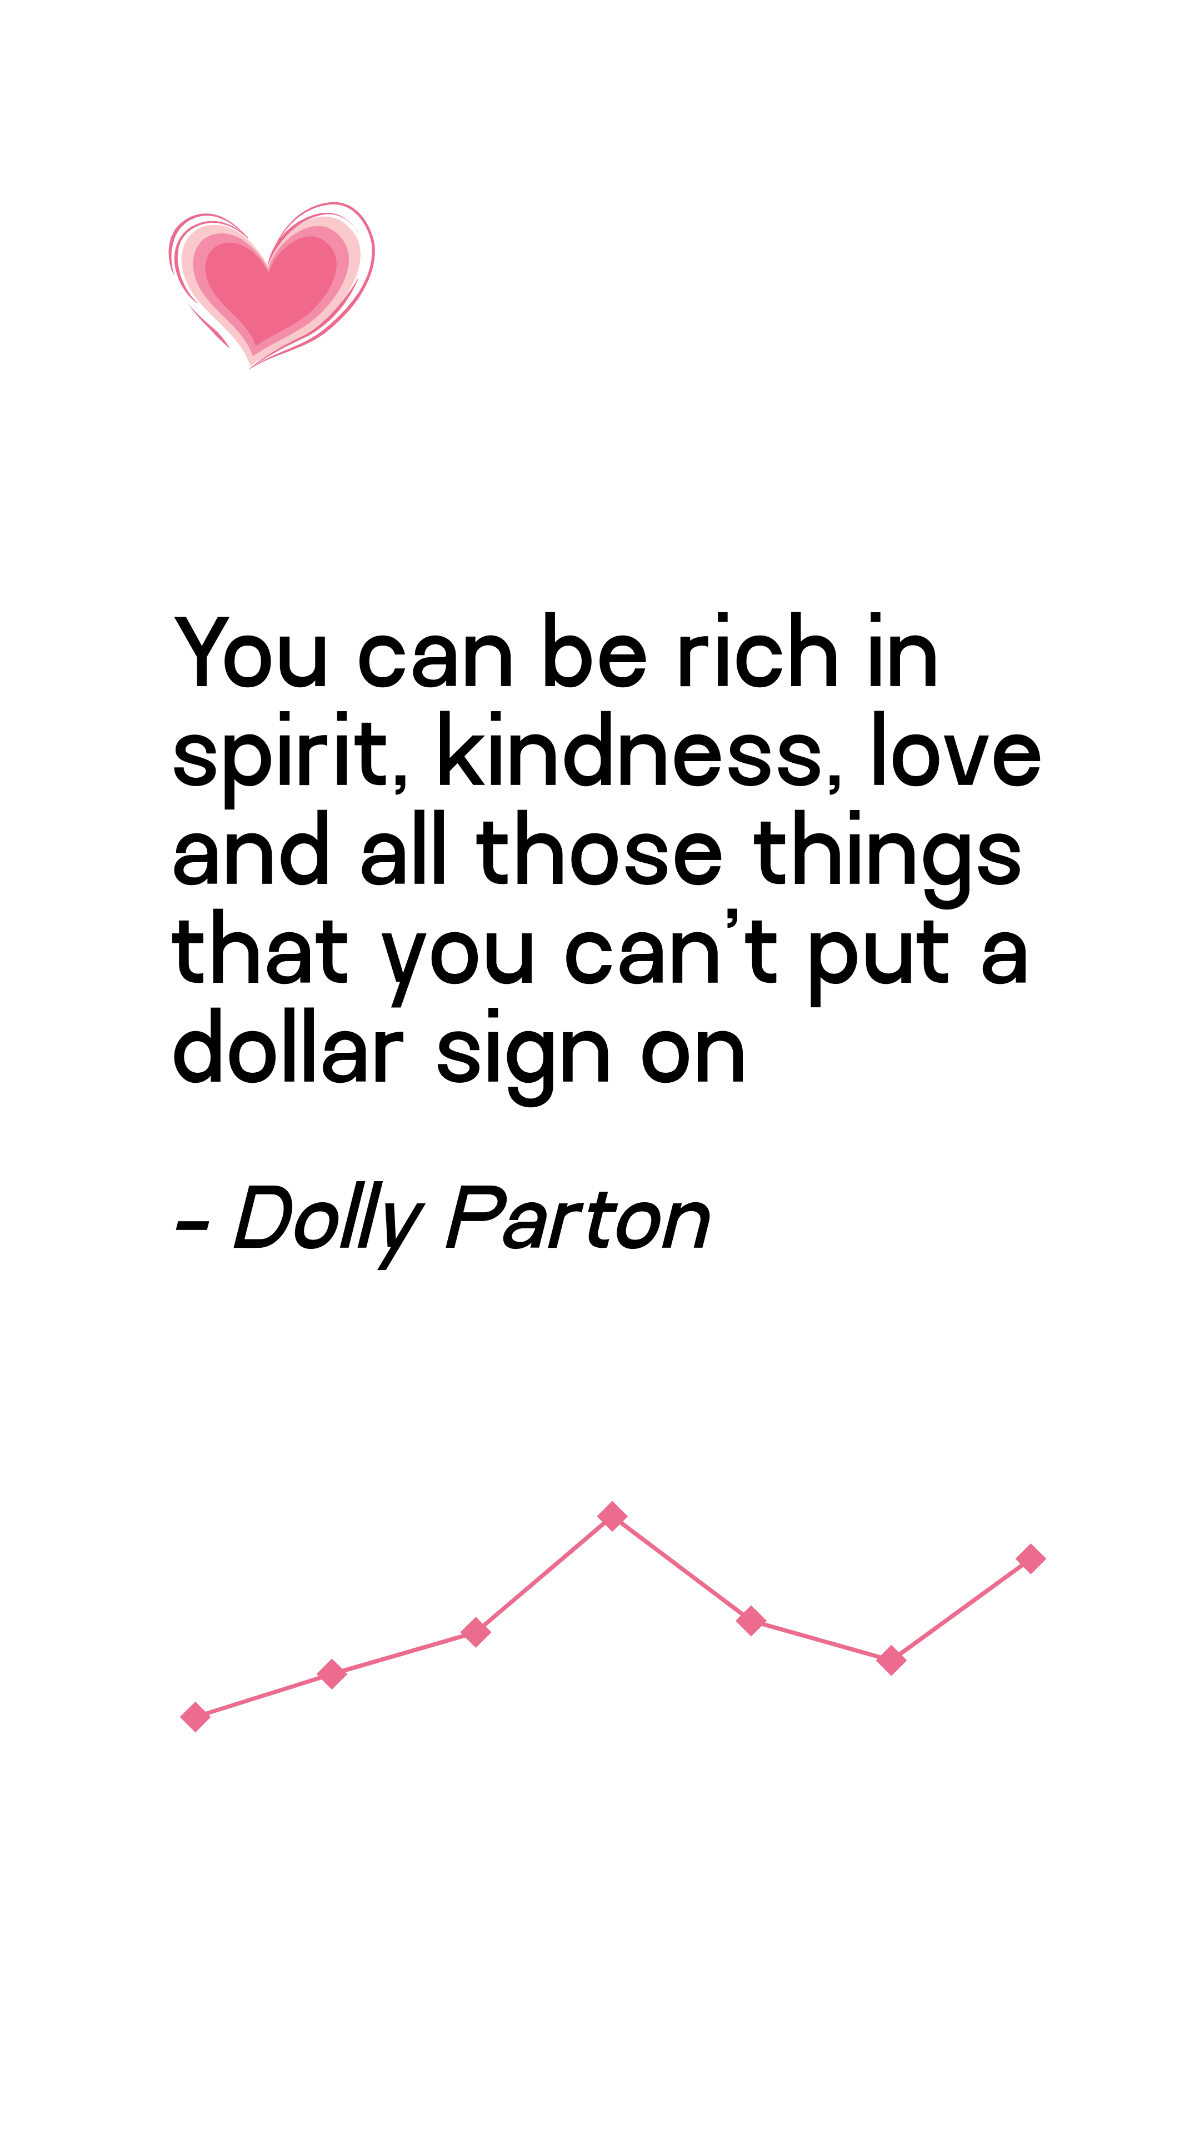 Dolly Parton - You can be rich in spirit, kindness, love and all those things that you can't put a dollar sign on Template